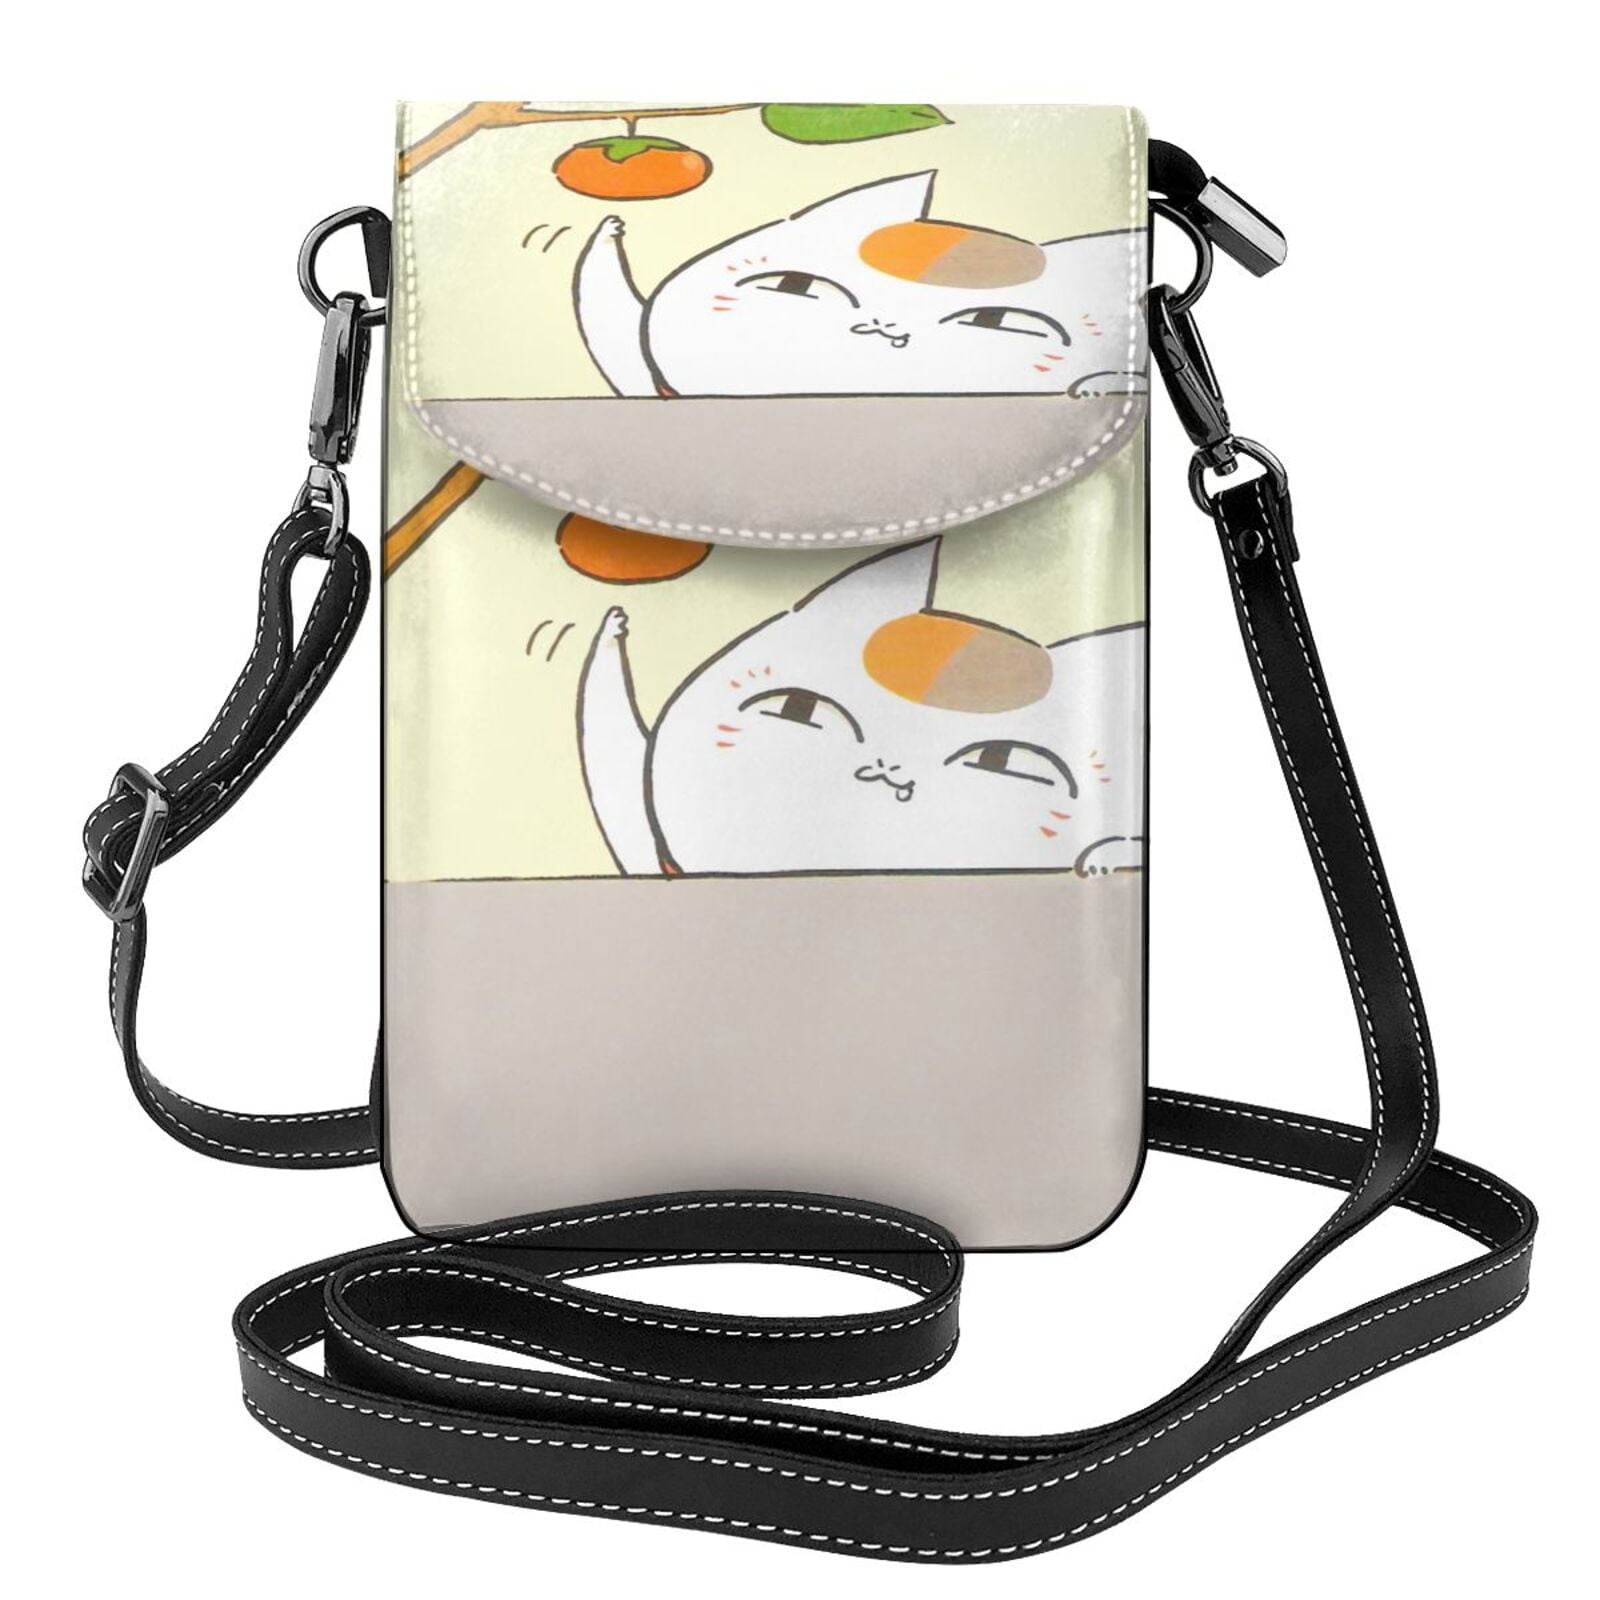 Mini Messenger Shoulder Bag Wallet With Credit Card Slots Small Crossbody Animal Cat Playing Instrument Cartoon Cartoon Cell Phone Purse For Women 